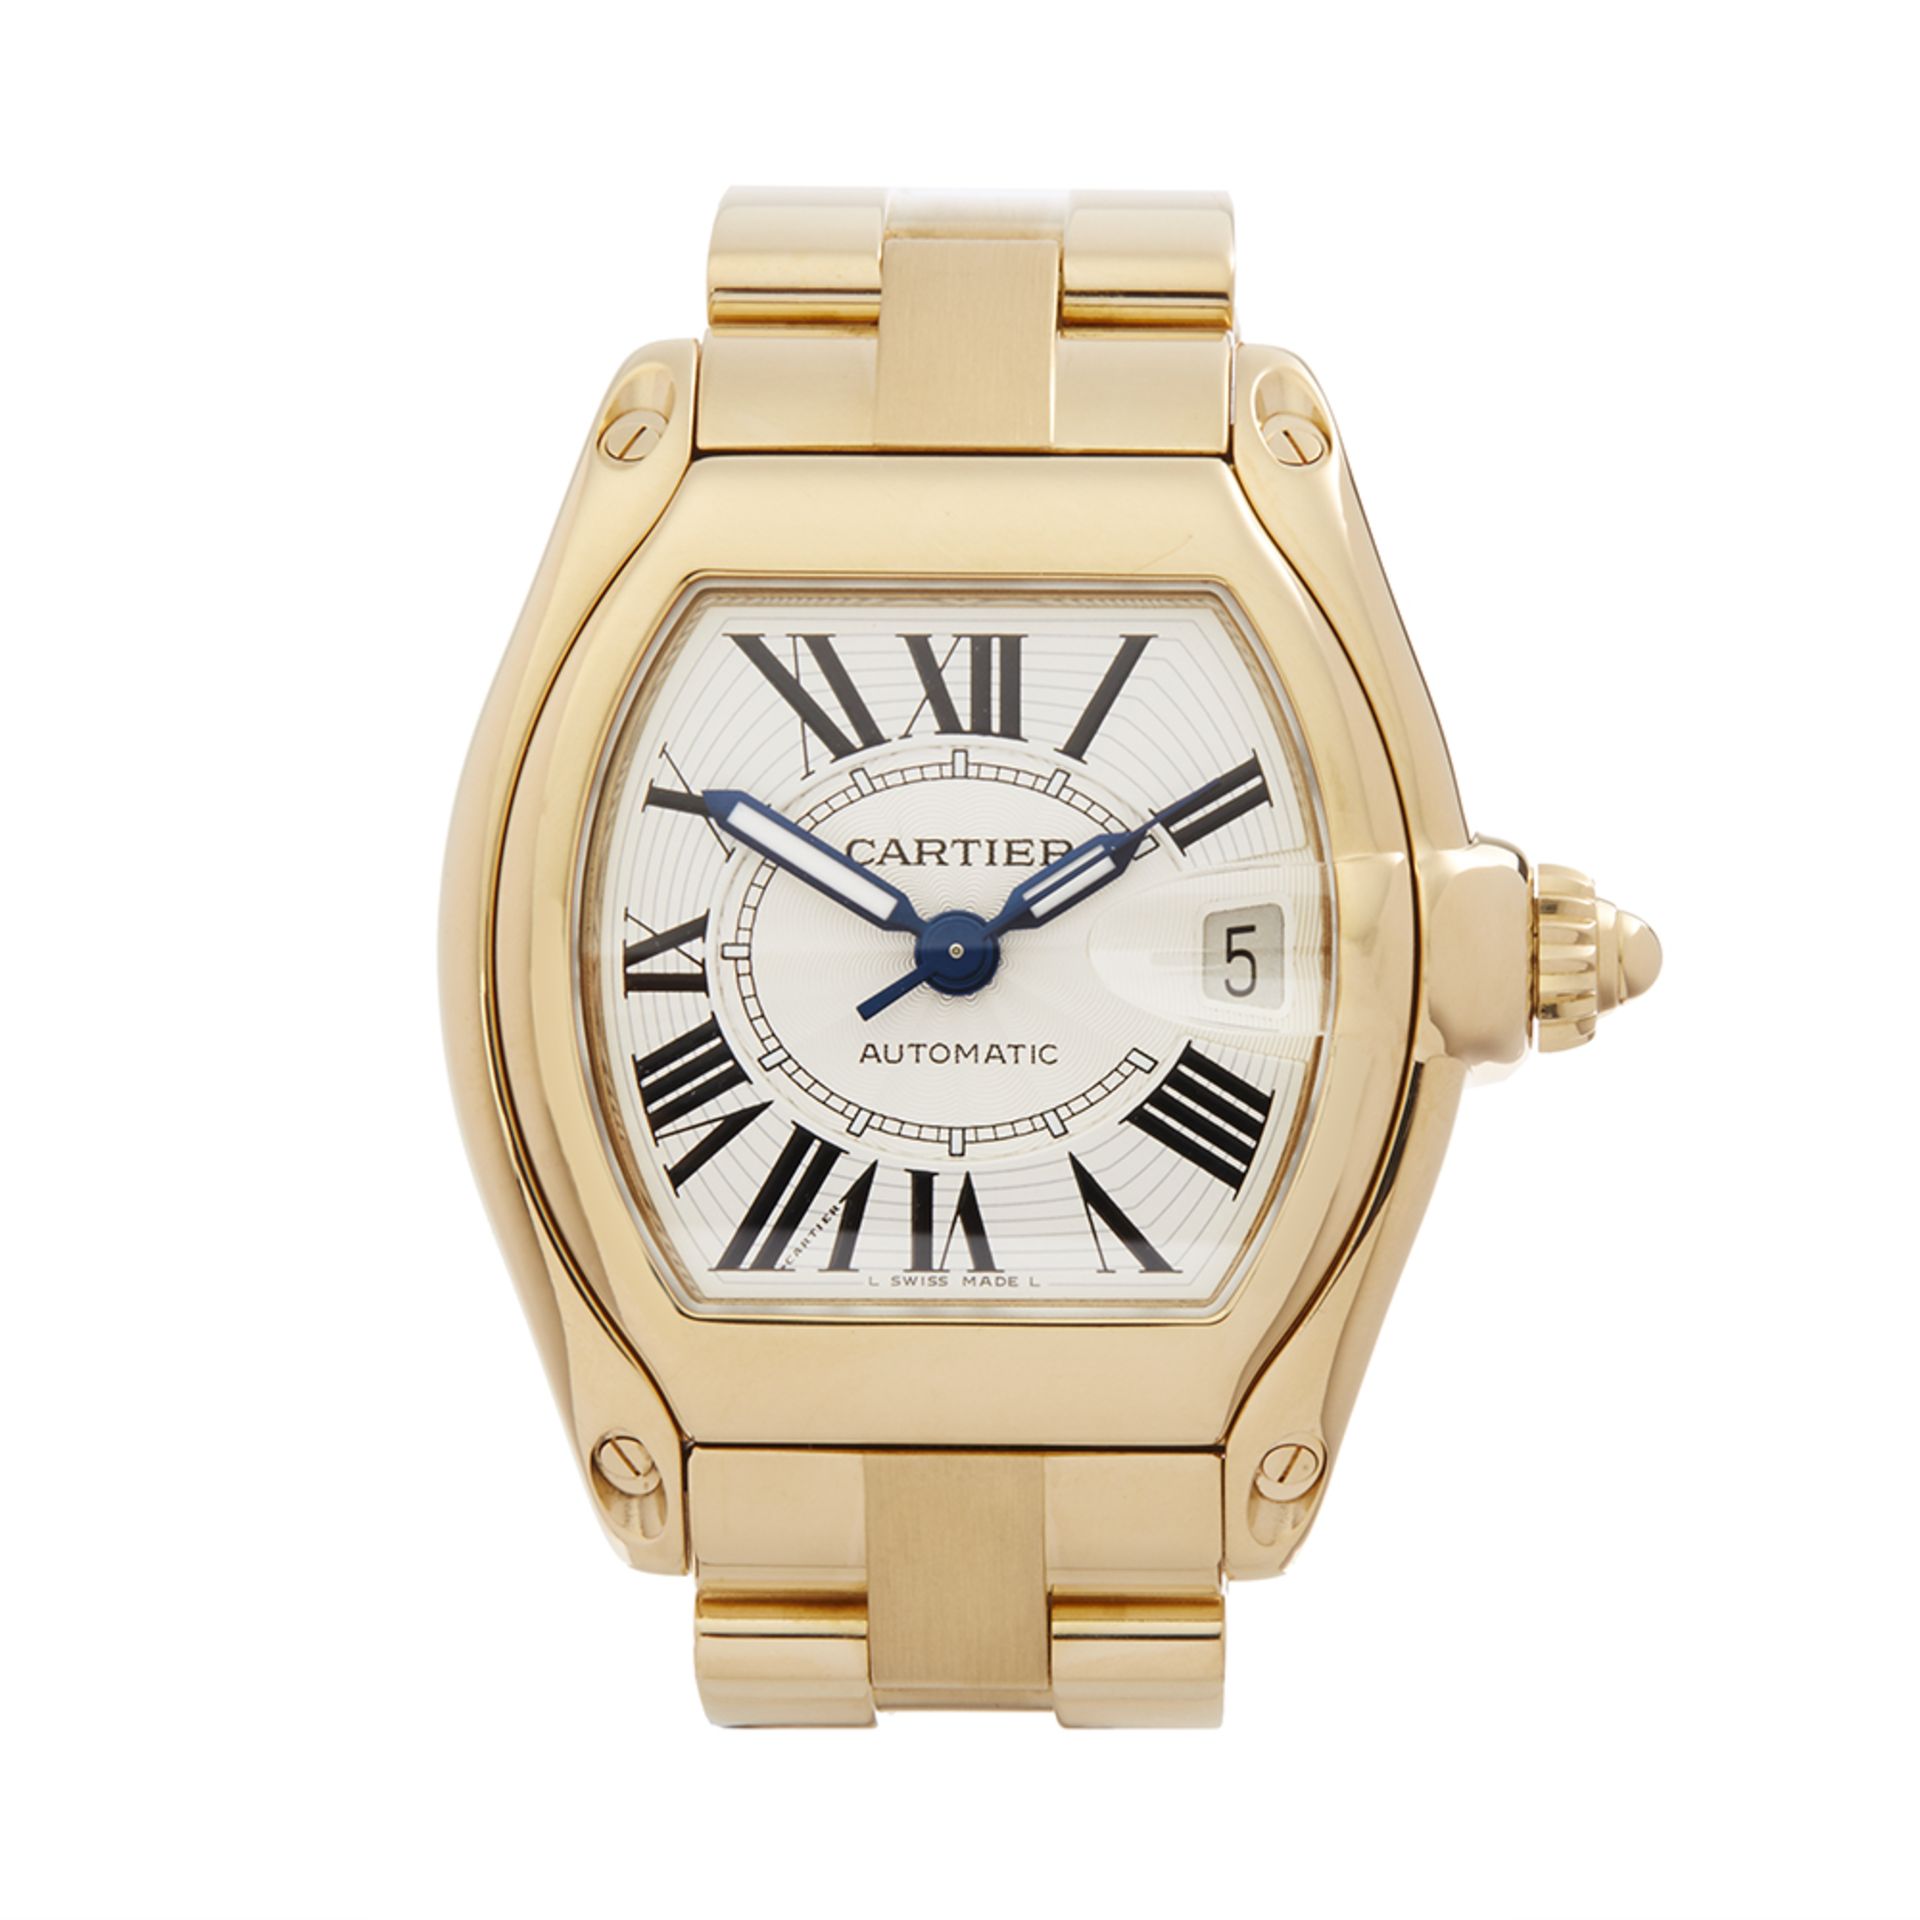 Cartier Roadster 18K Yellow Gold - 2524 or W620005V2 - Image 2 of 7